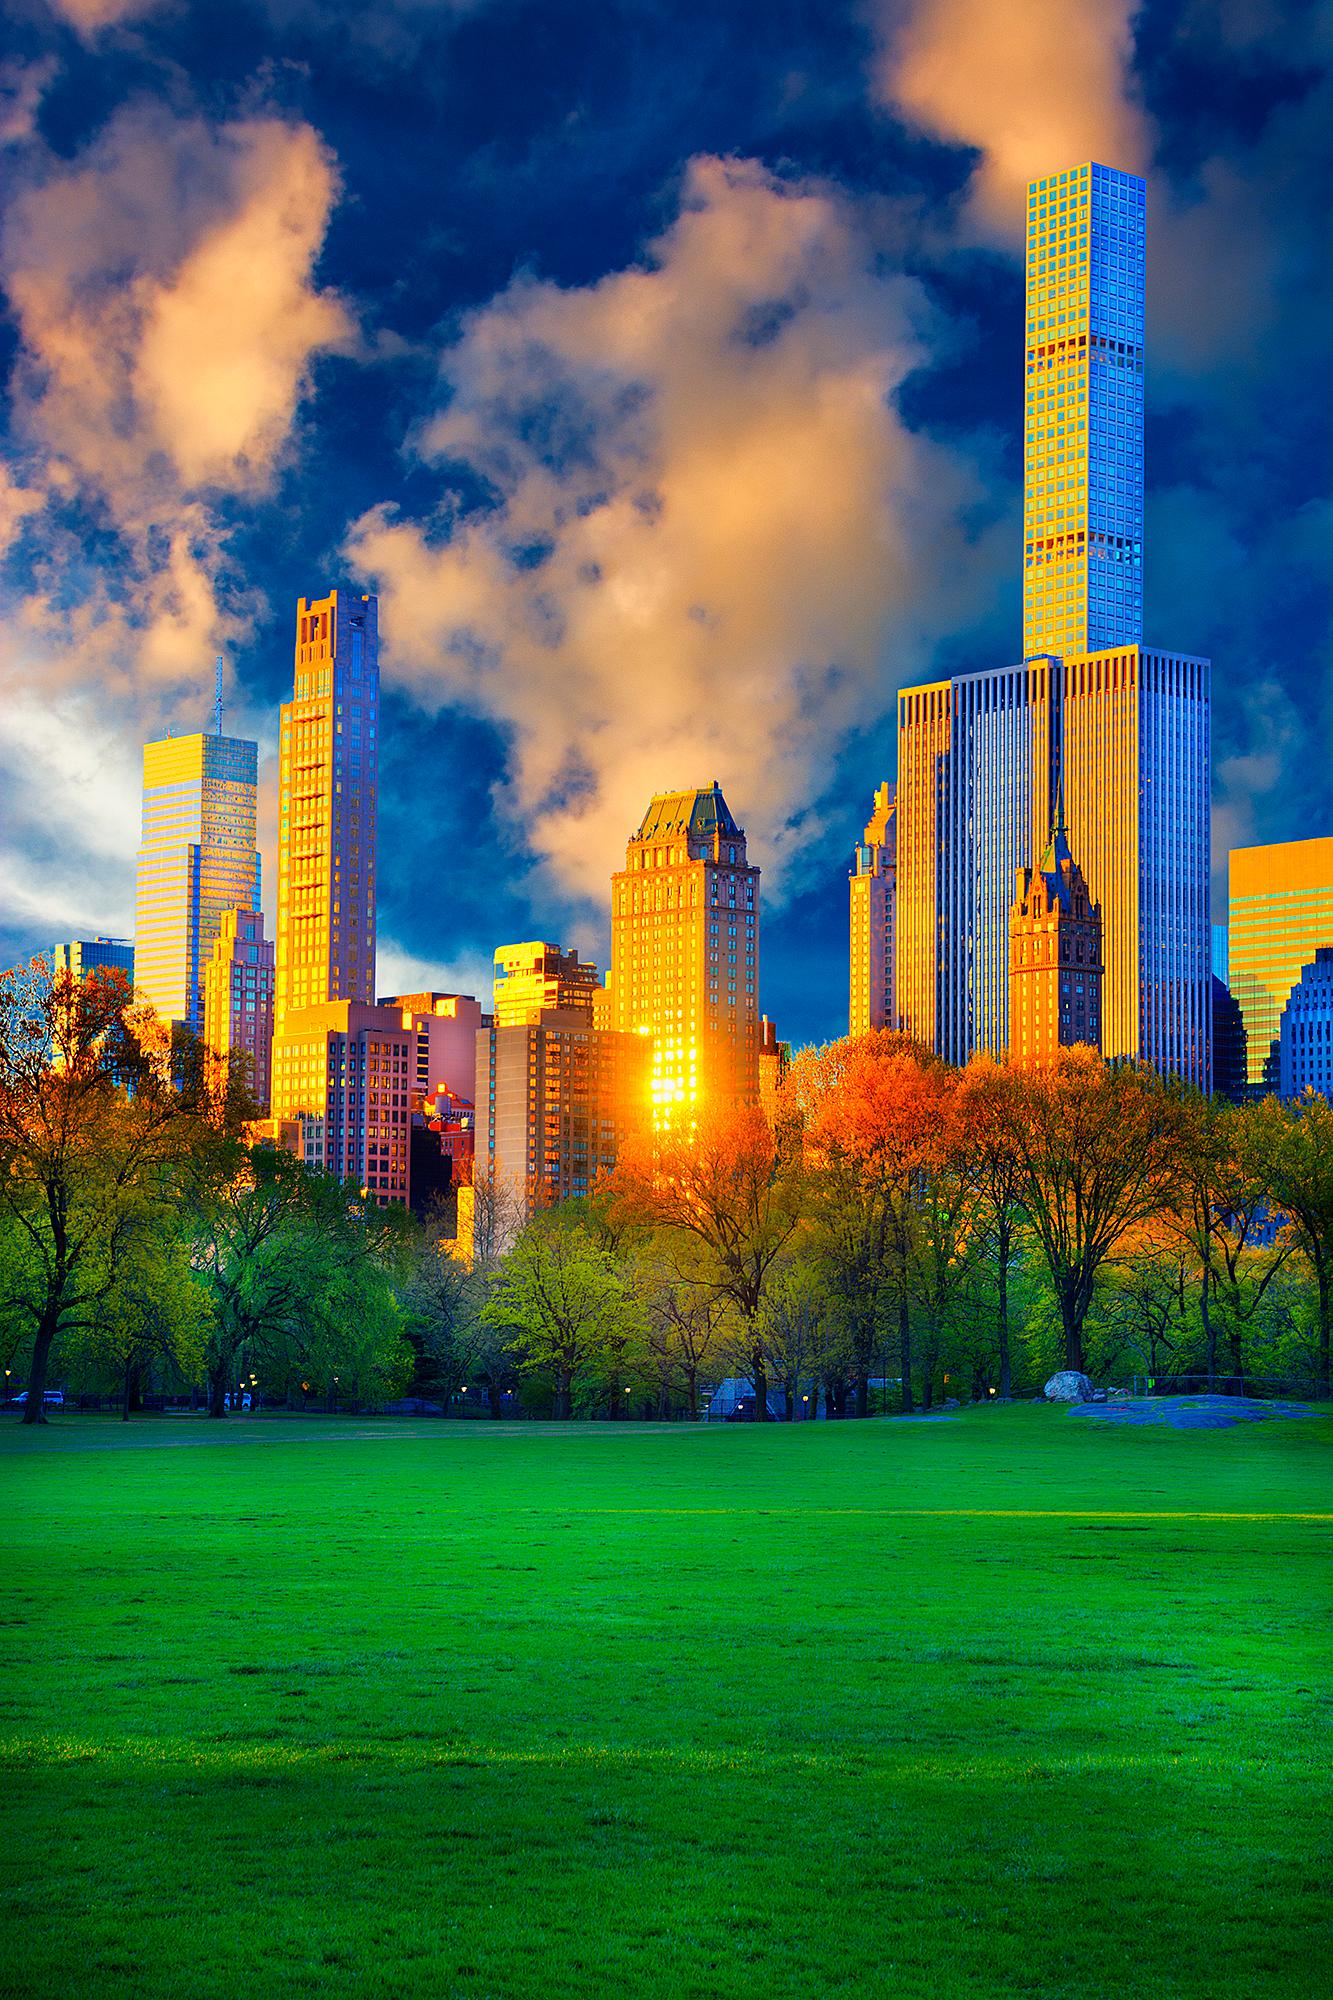 Mitchell Funk Landscape Photograph - Hotel Pierre and Sherry-Netherland from Central Park Landscape